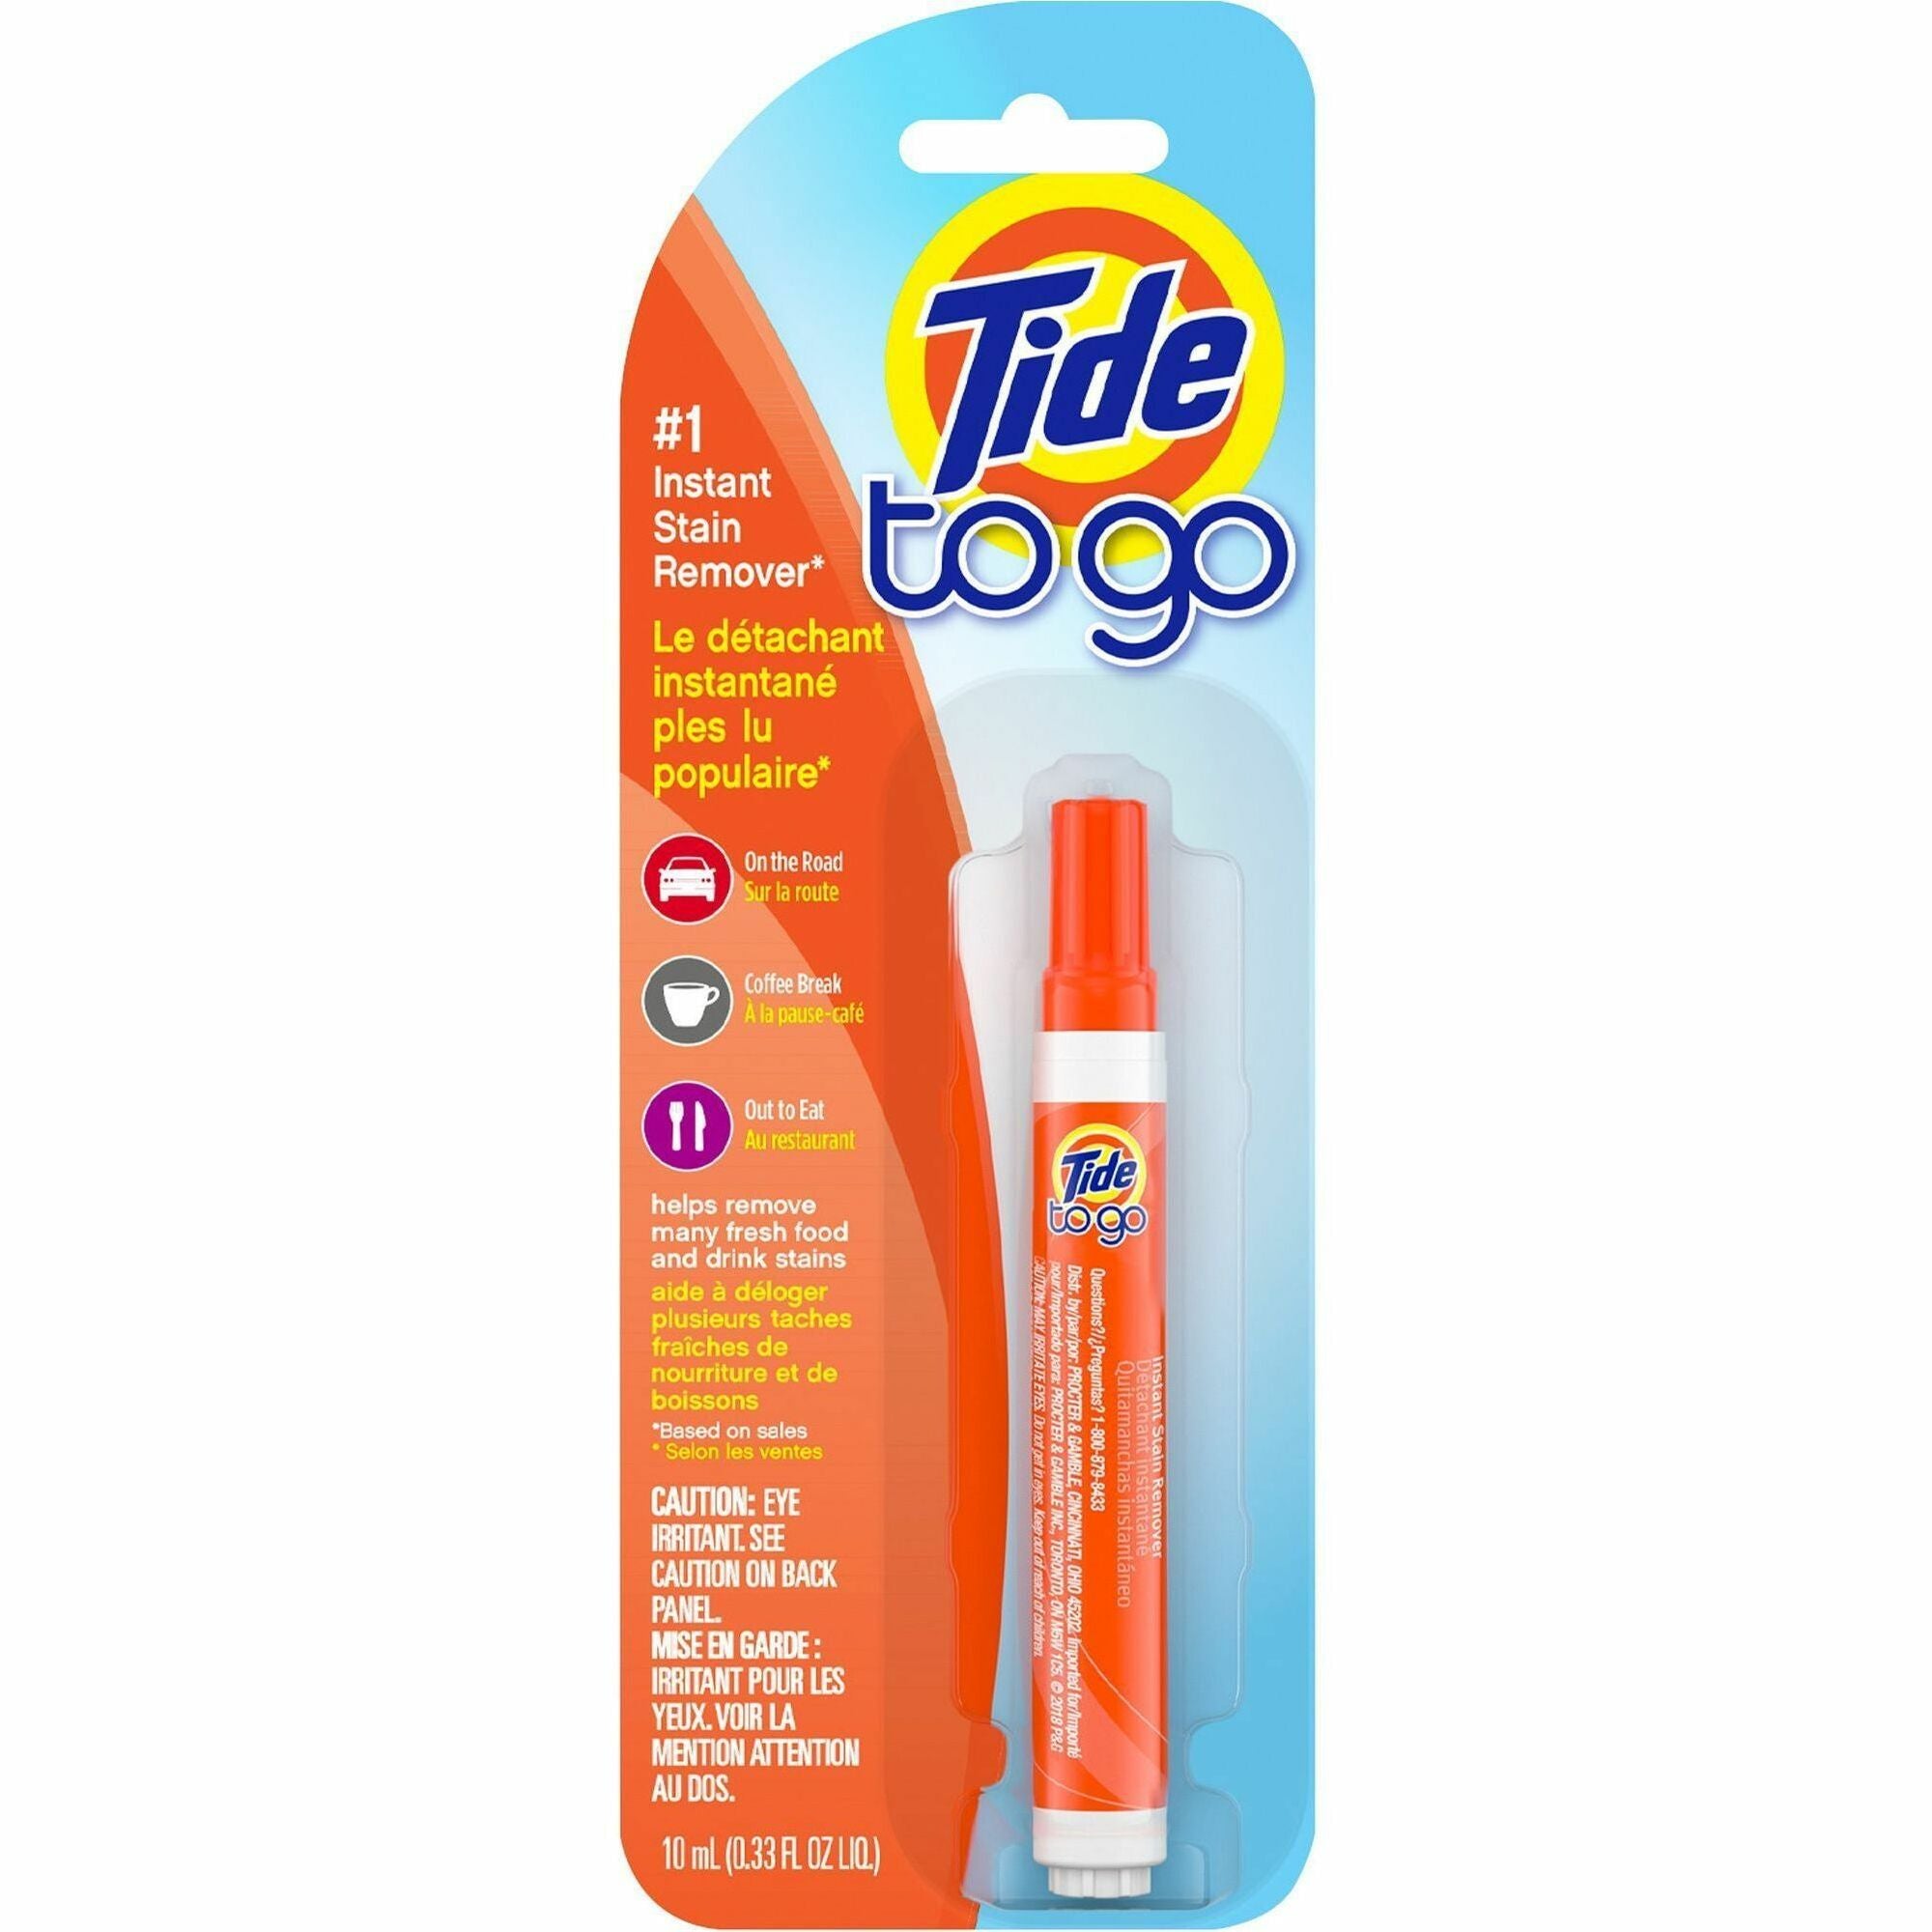 tide-to-go-stain-remover-pen-034-oz-002-lb-1-each-phosphate-free-machine-washable-bleach-free-orange_nmc01205 - 1